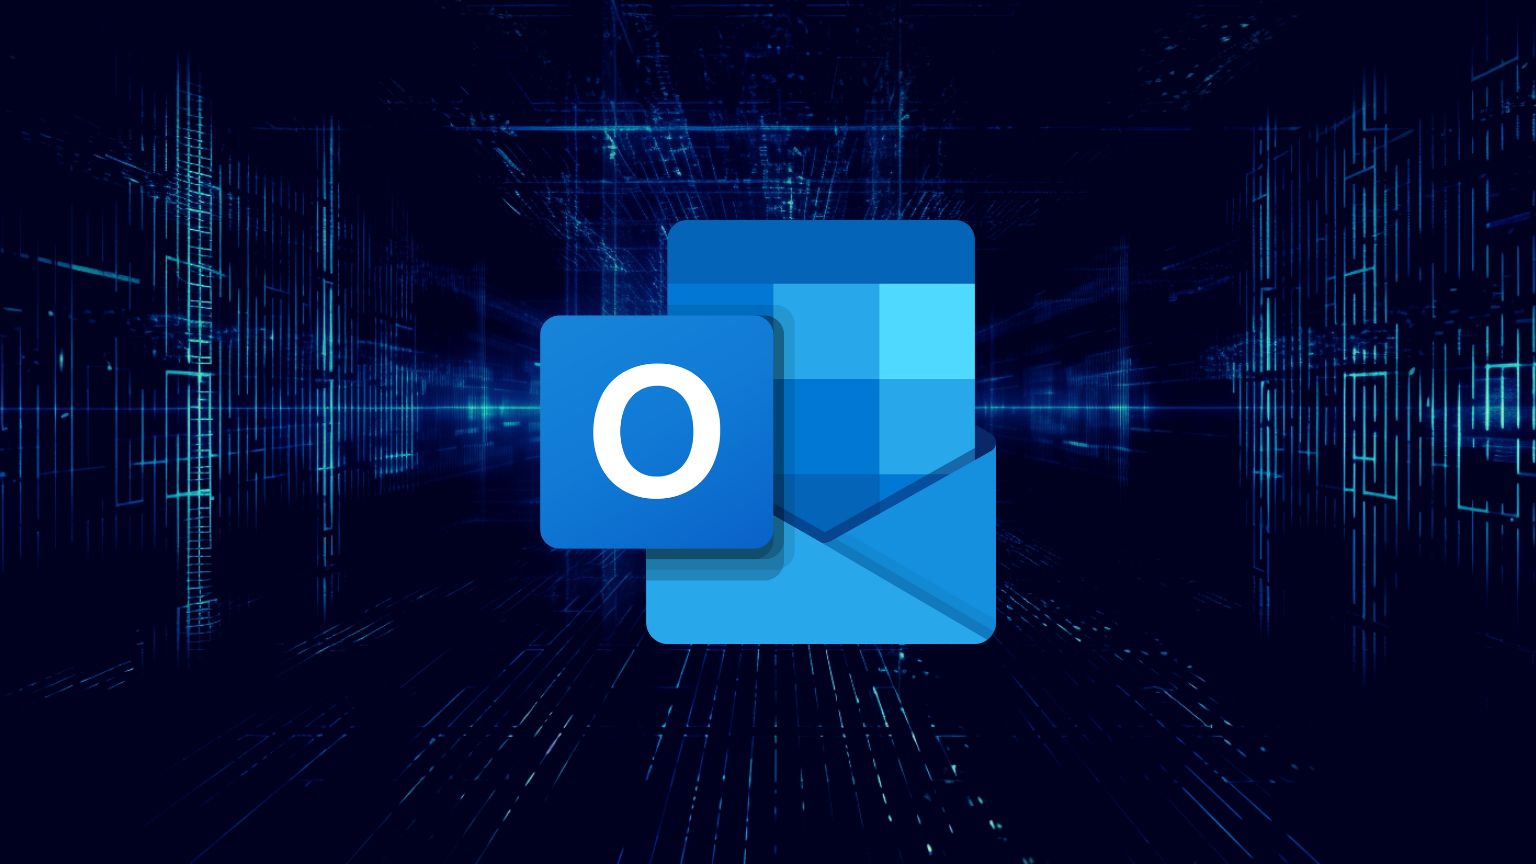 The New Outlook Overshares Data With Microsoft